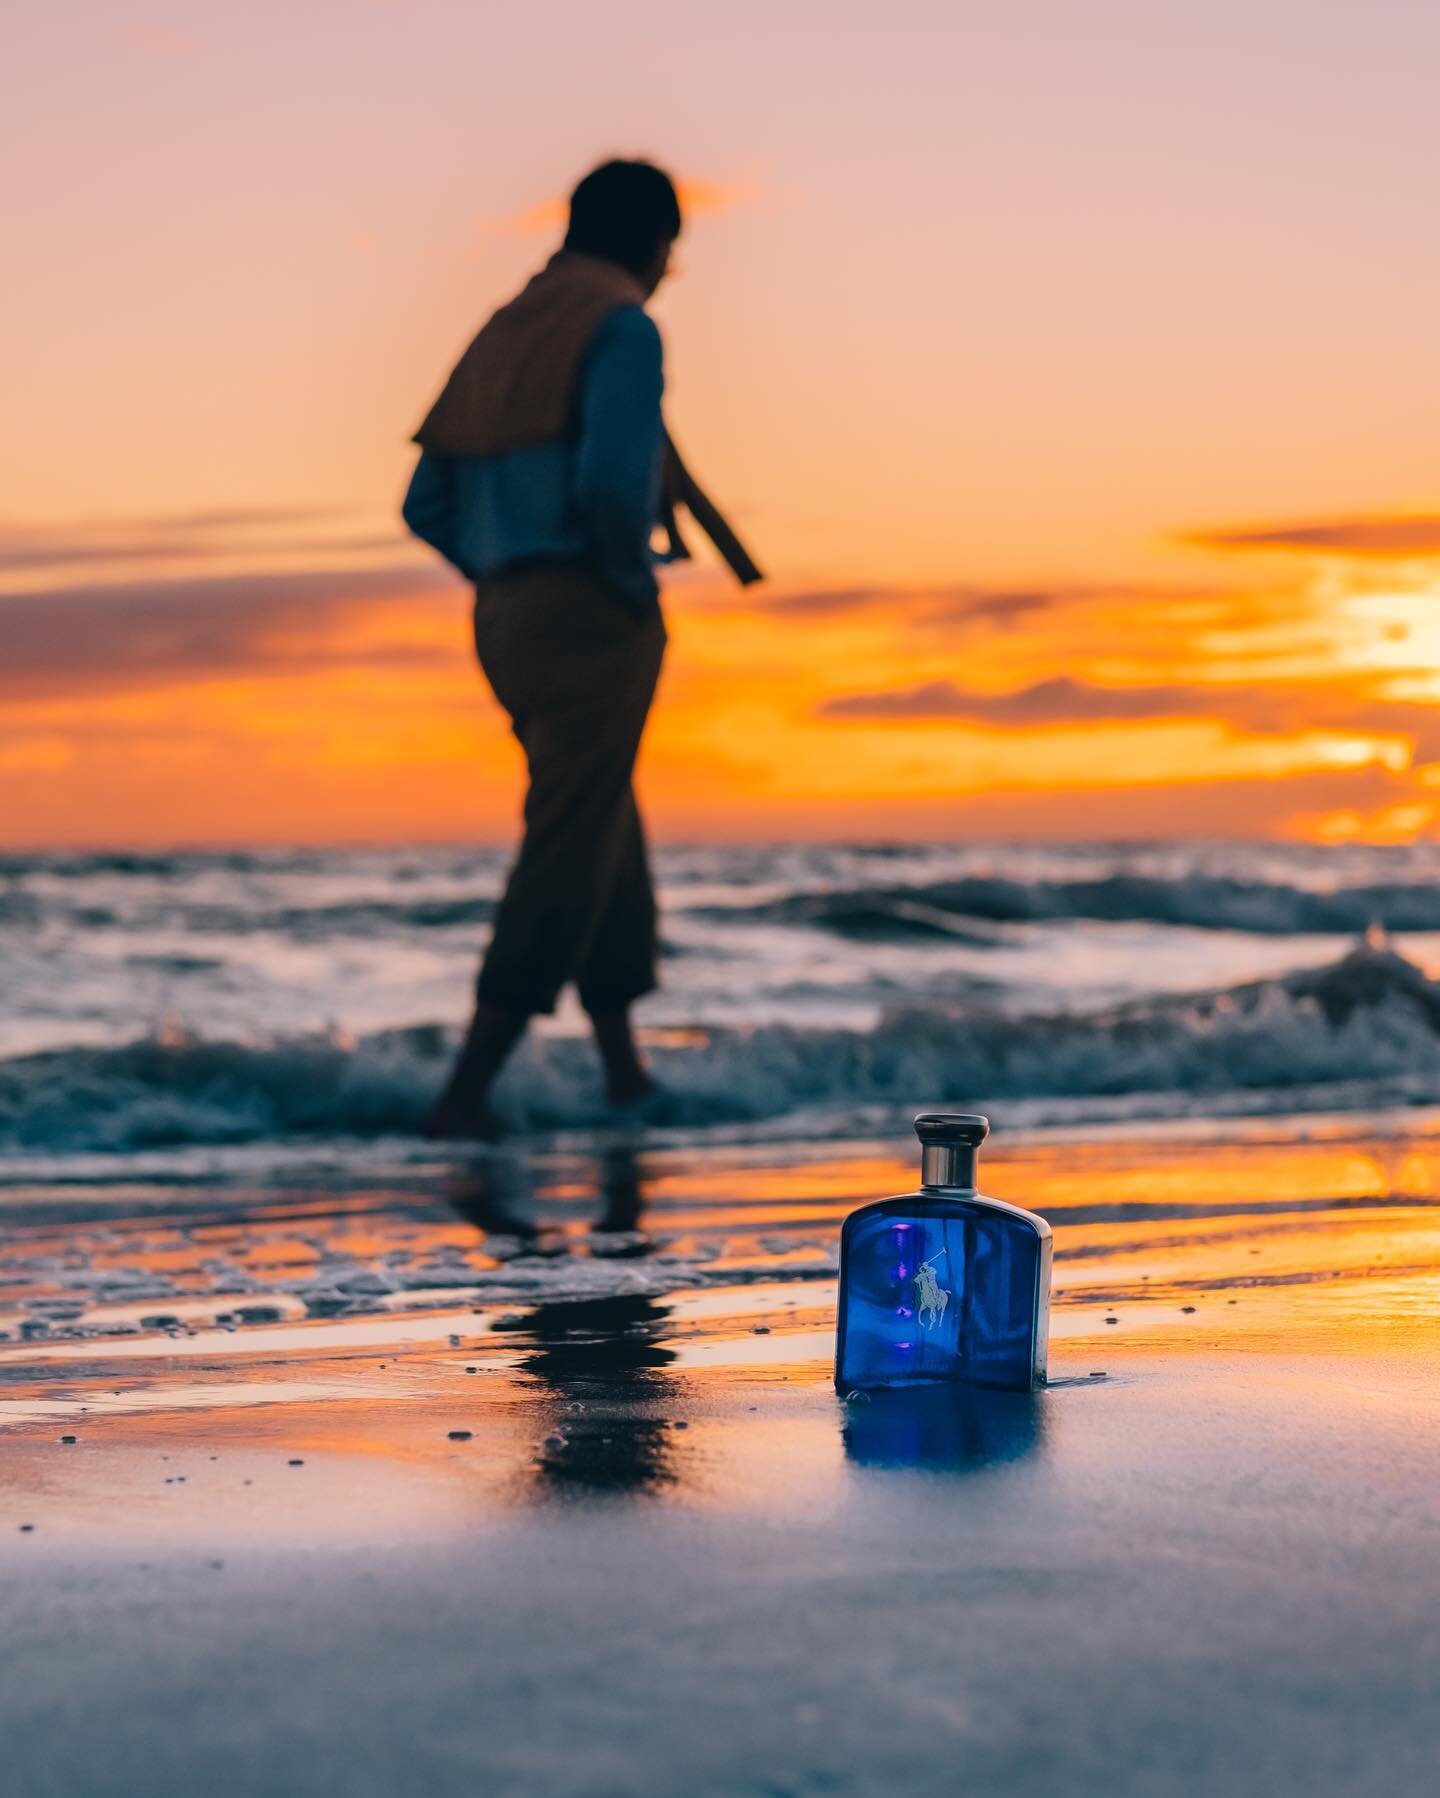 Sophisticated and masculine fragrance of @ralphlaurenfragrances #Poloblue strikes the perfect balance between the freshness and seductiveness 🌅💦

🌊 Top notes: Sea Notes, Bergamot and Cardamom
🌱 Mid notes: Basil, Verbena, Clary Sage and Orris
🪵 B